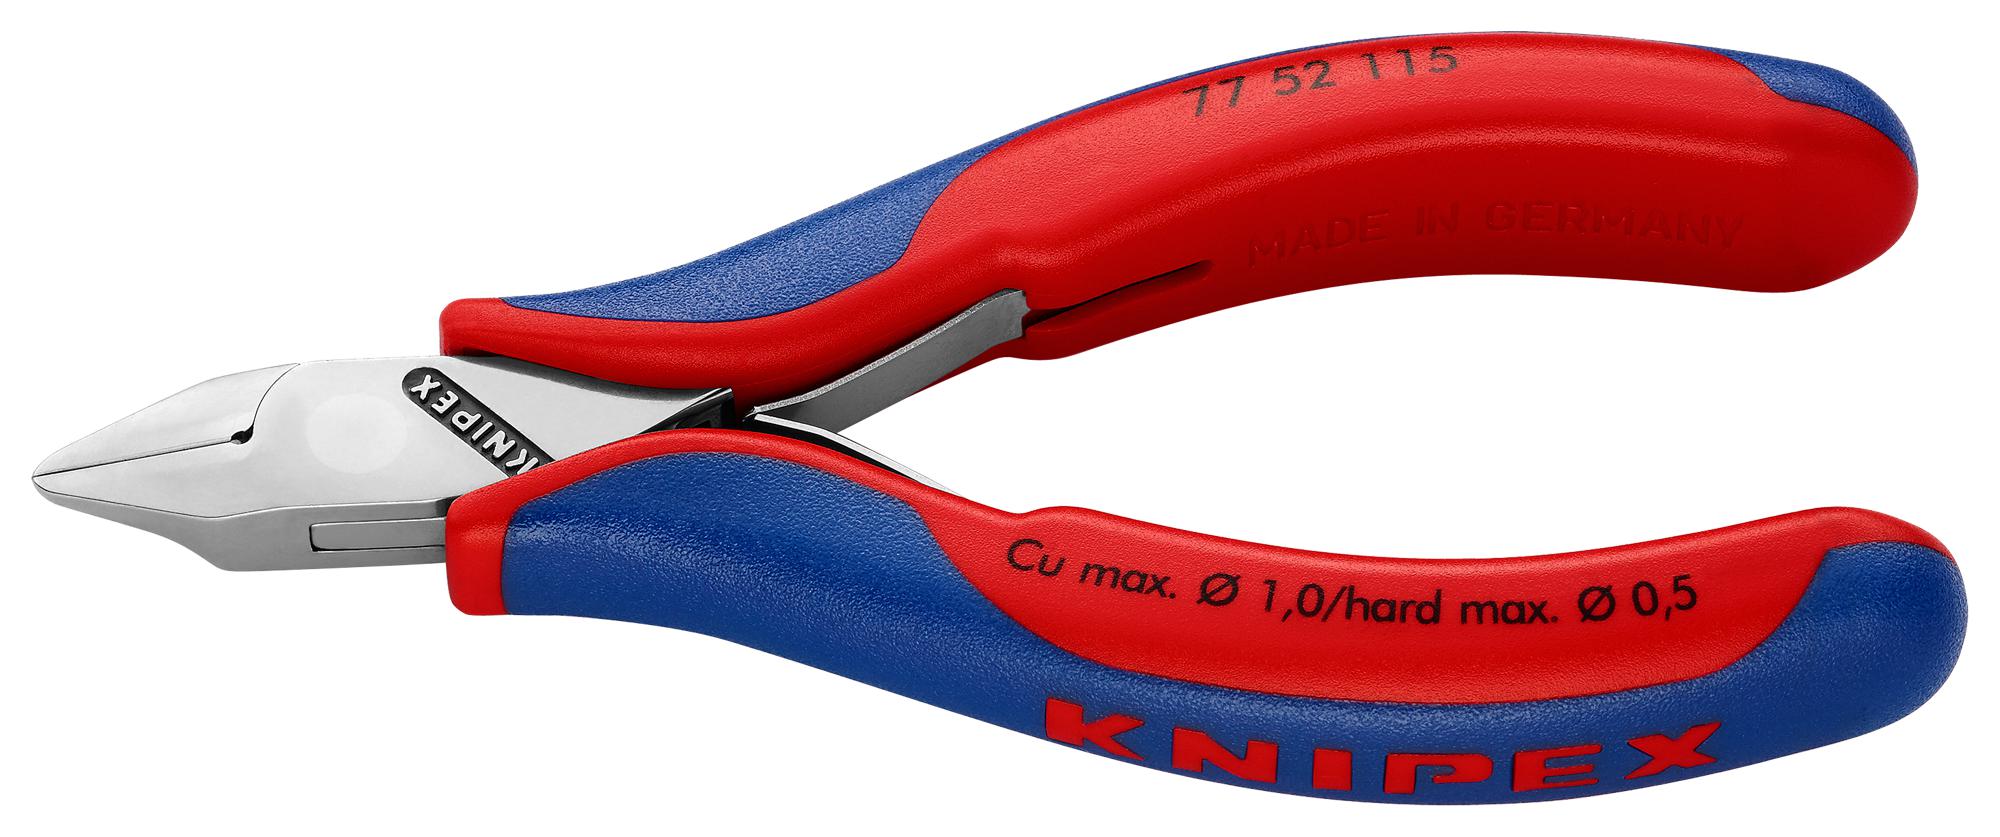 Knipex 77 52 115 Cutter, Red Handles